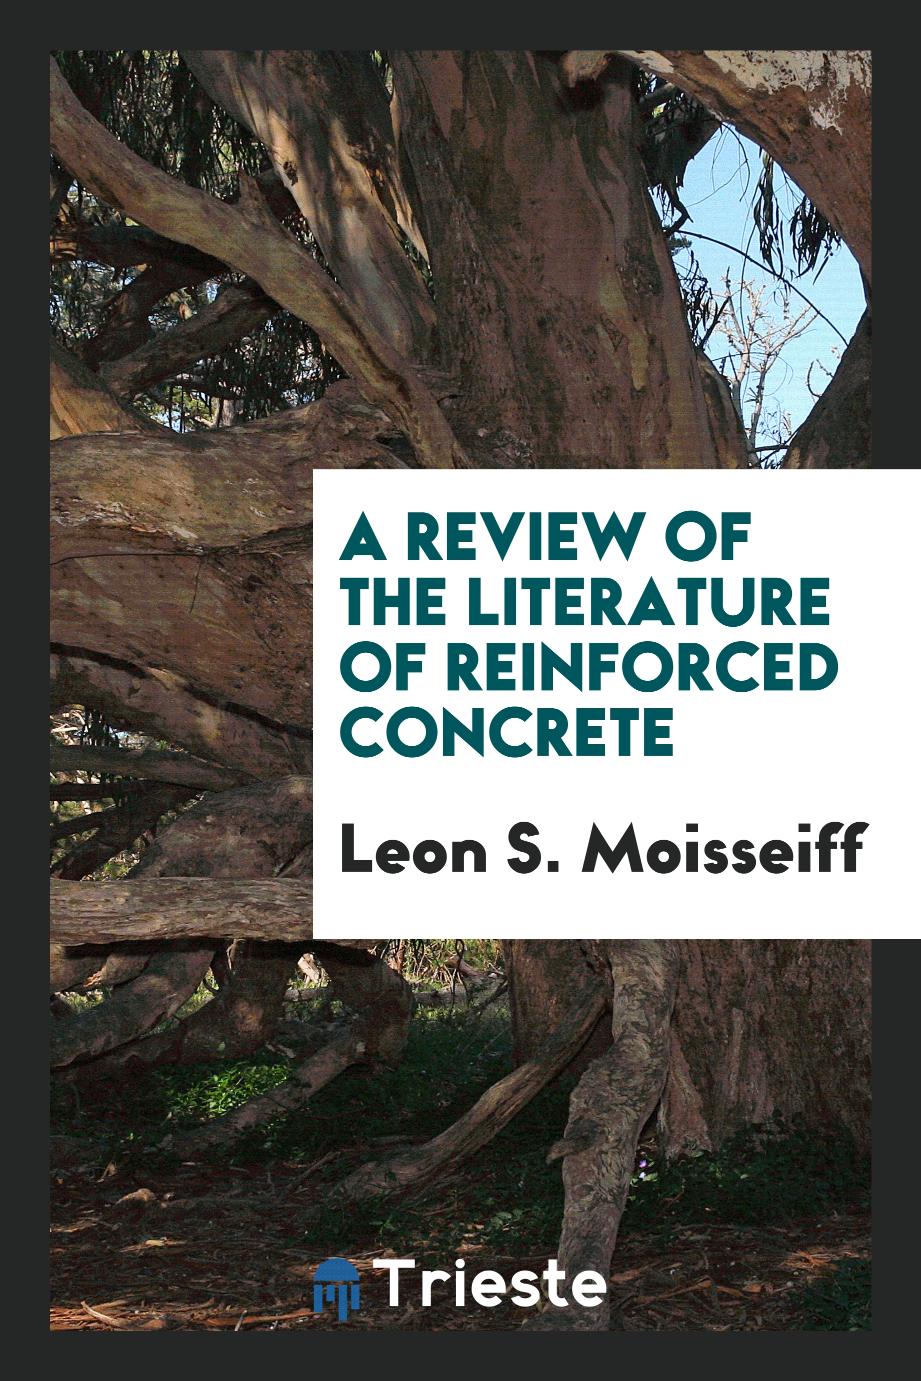 A Review of the Literature of Reinforced Concrete